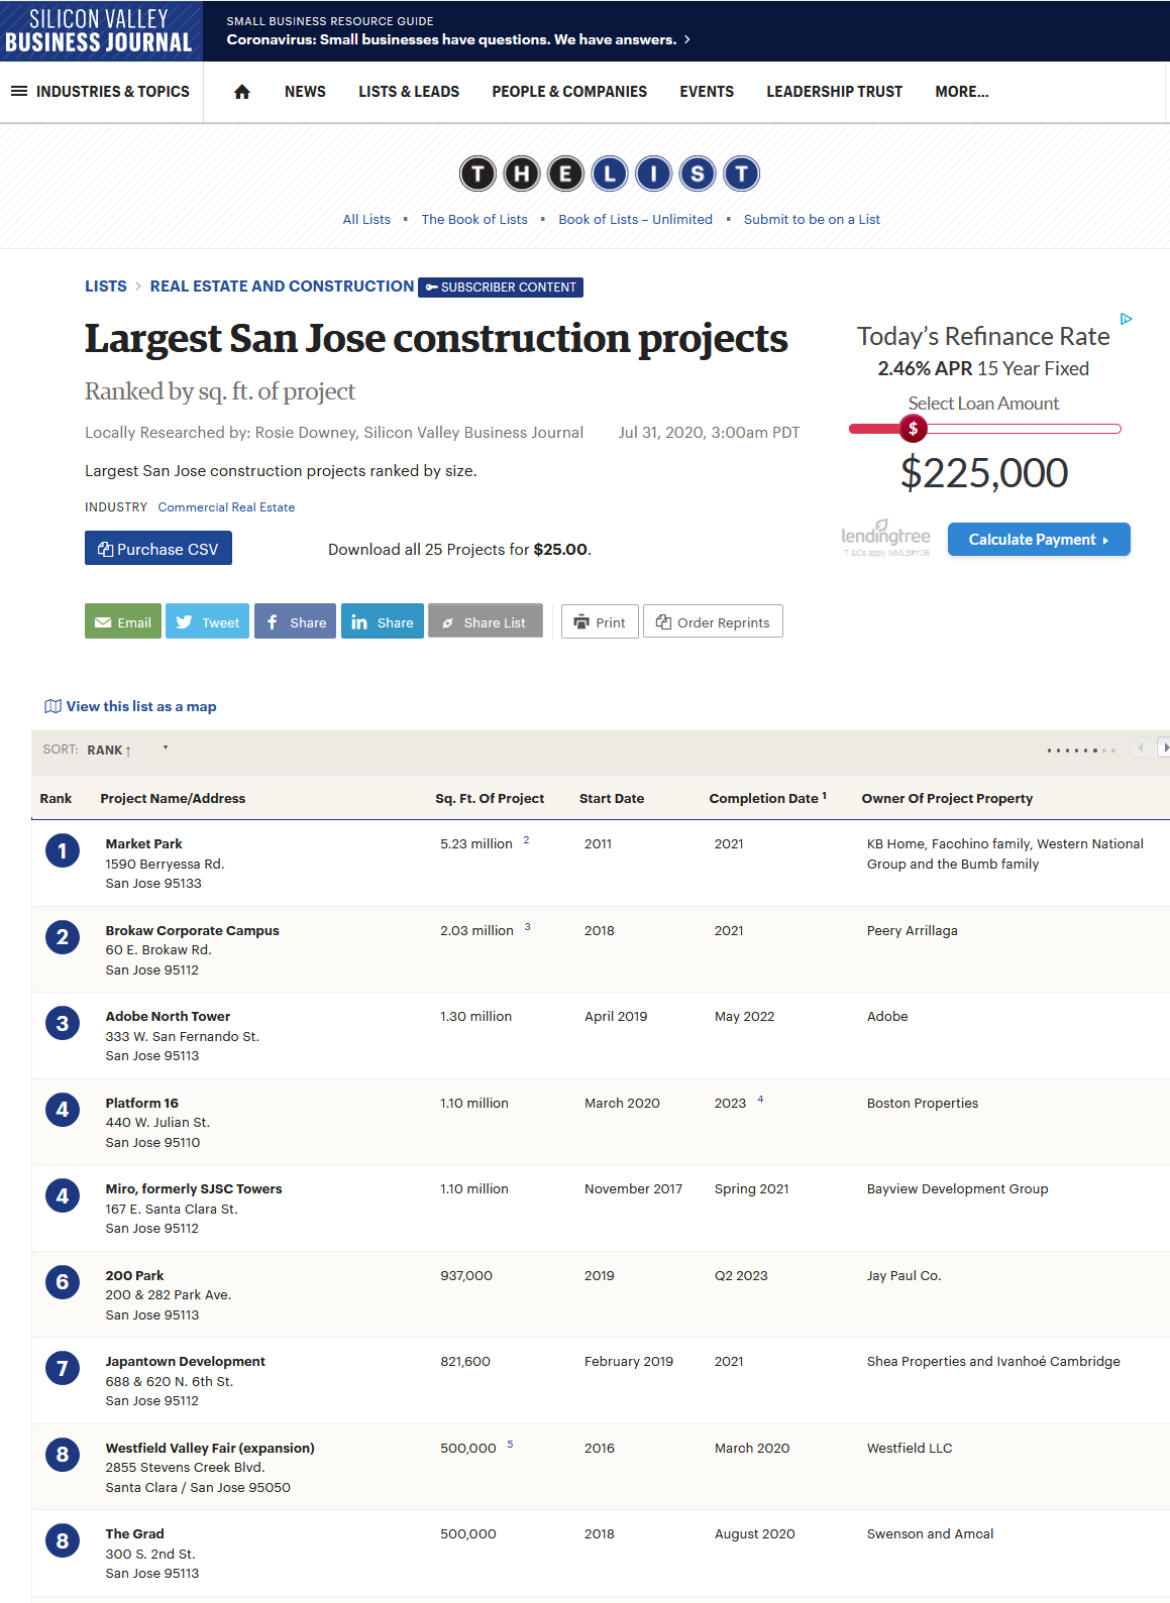 Silicon Valley Business Journal Top 8 Construction Projects list